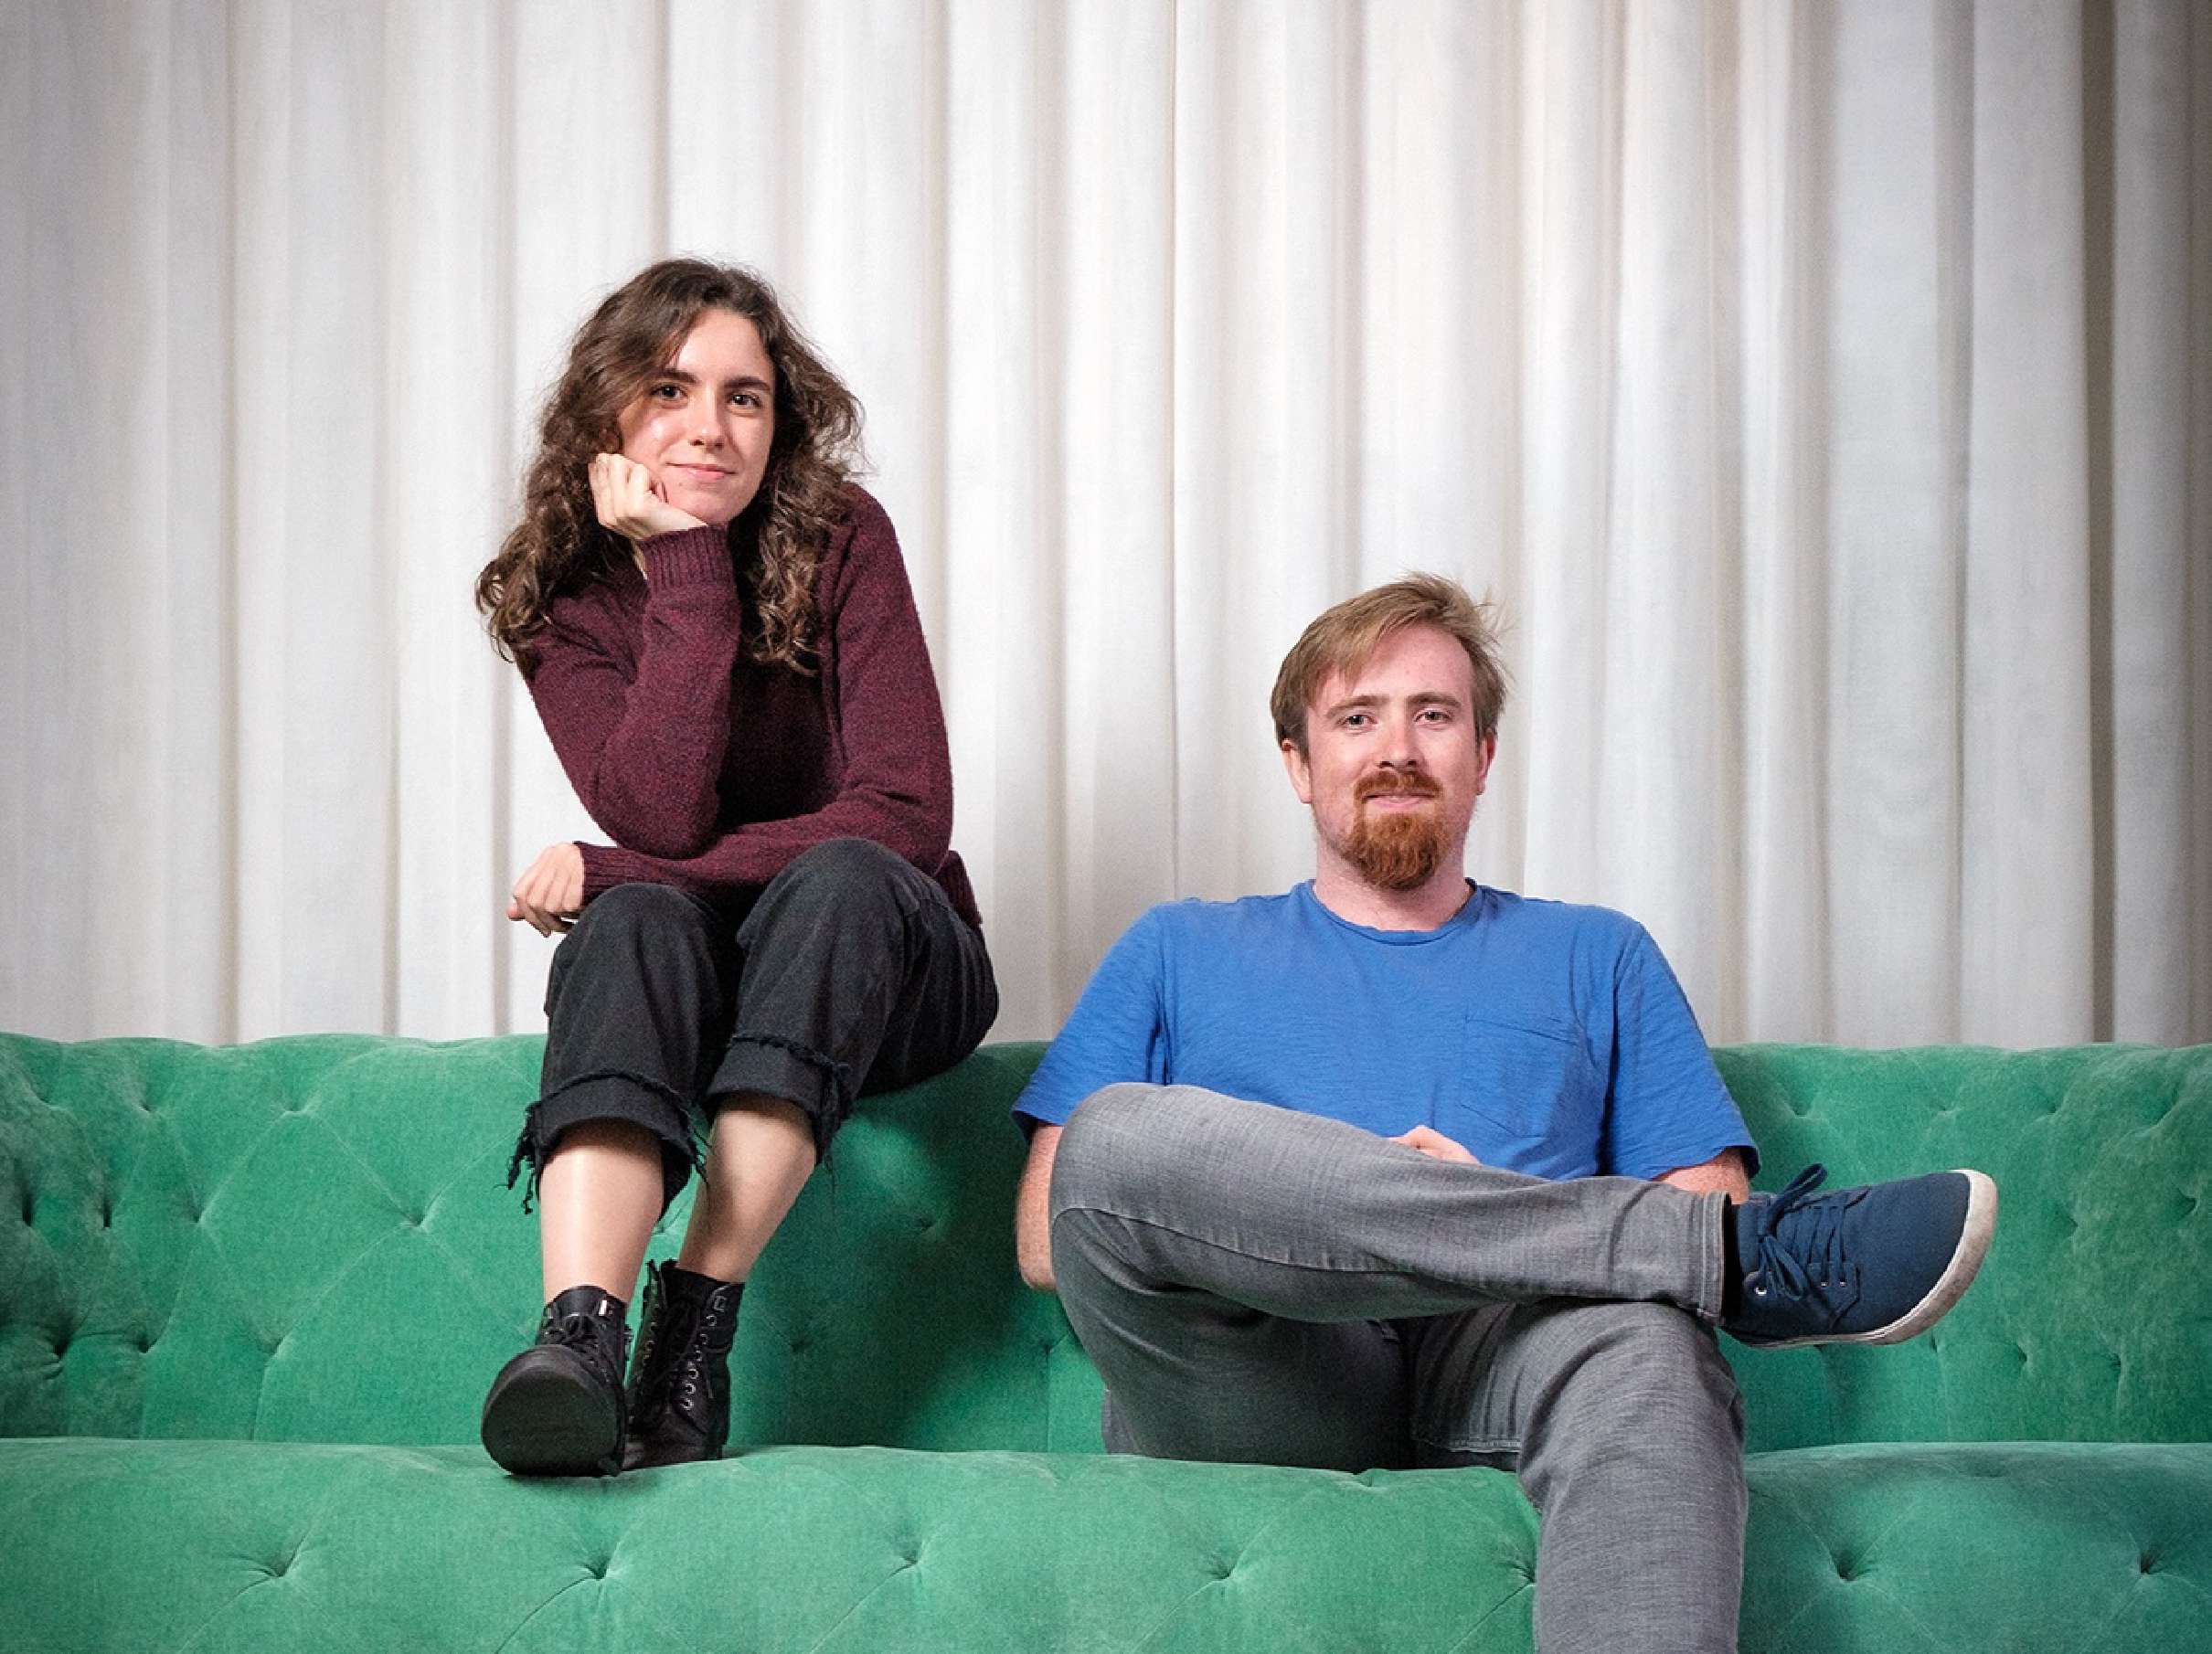 Idil and Connor on a green sofa